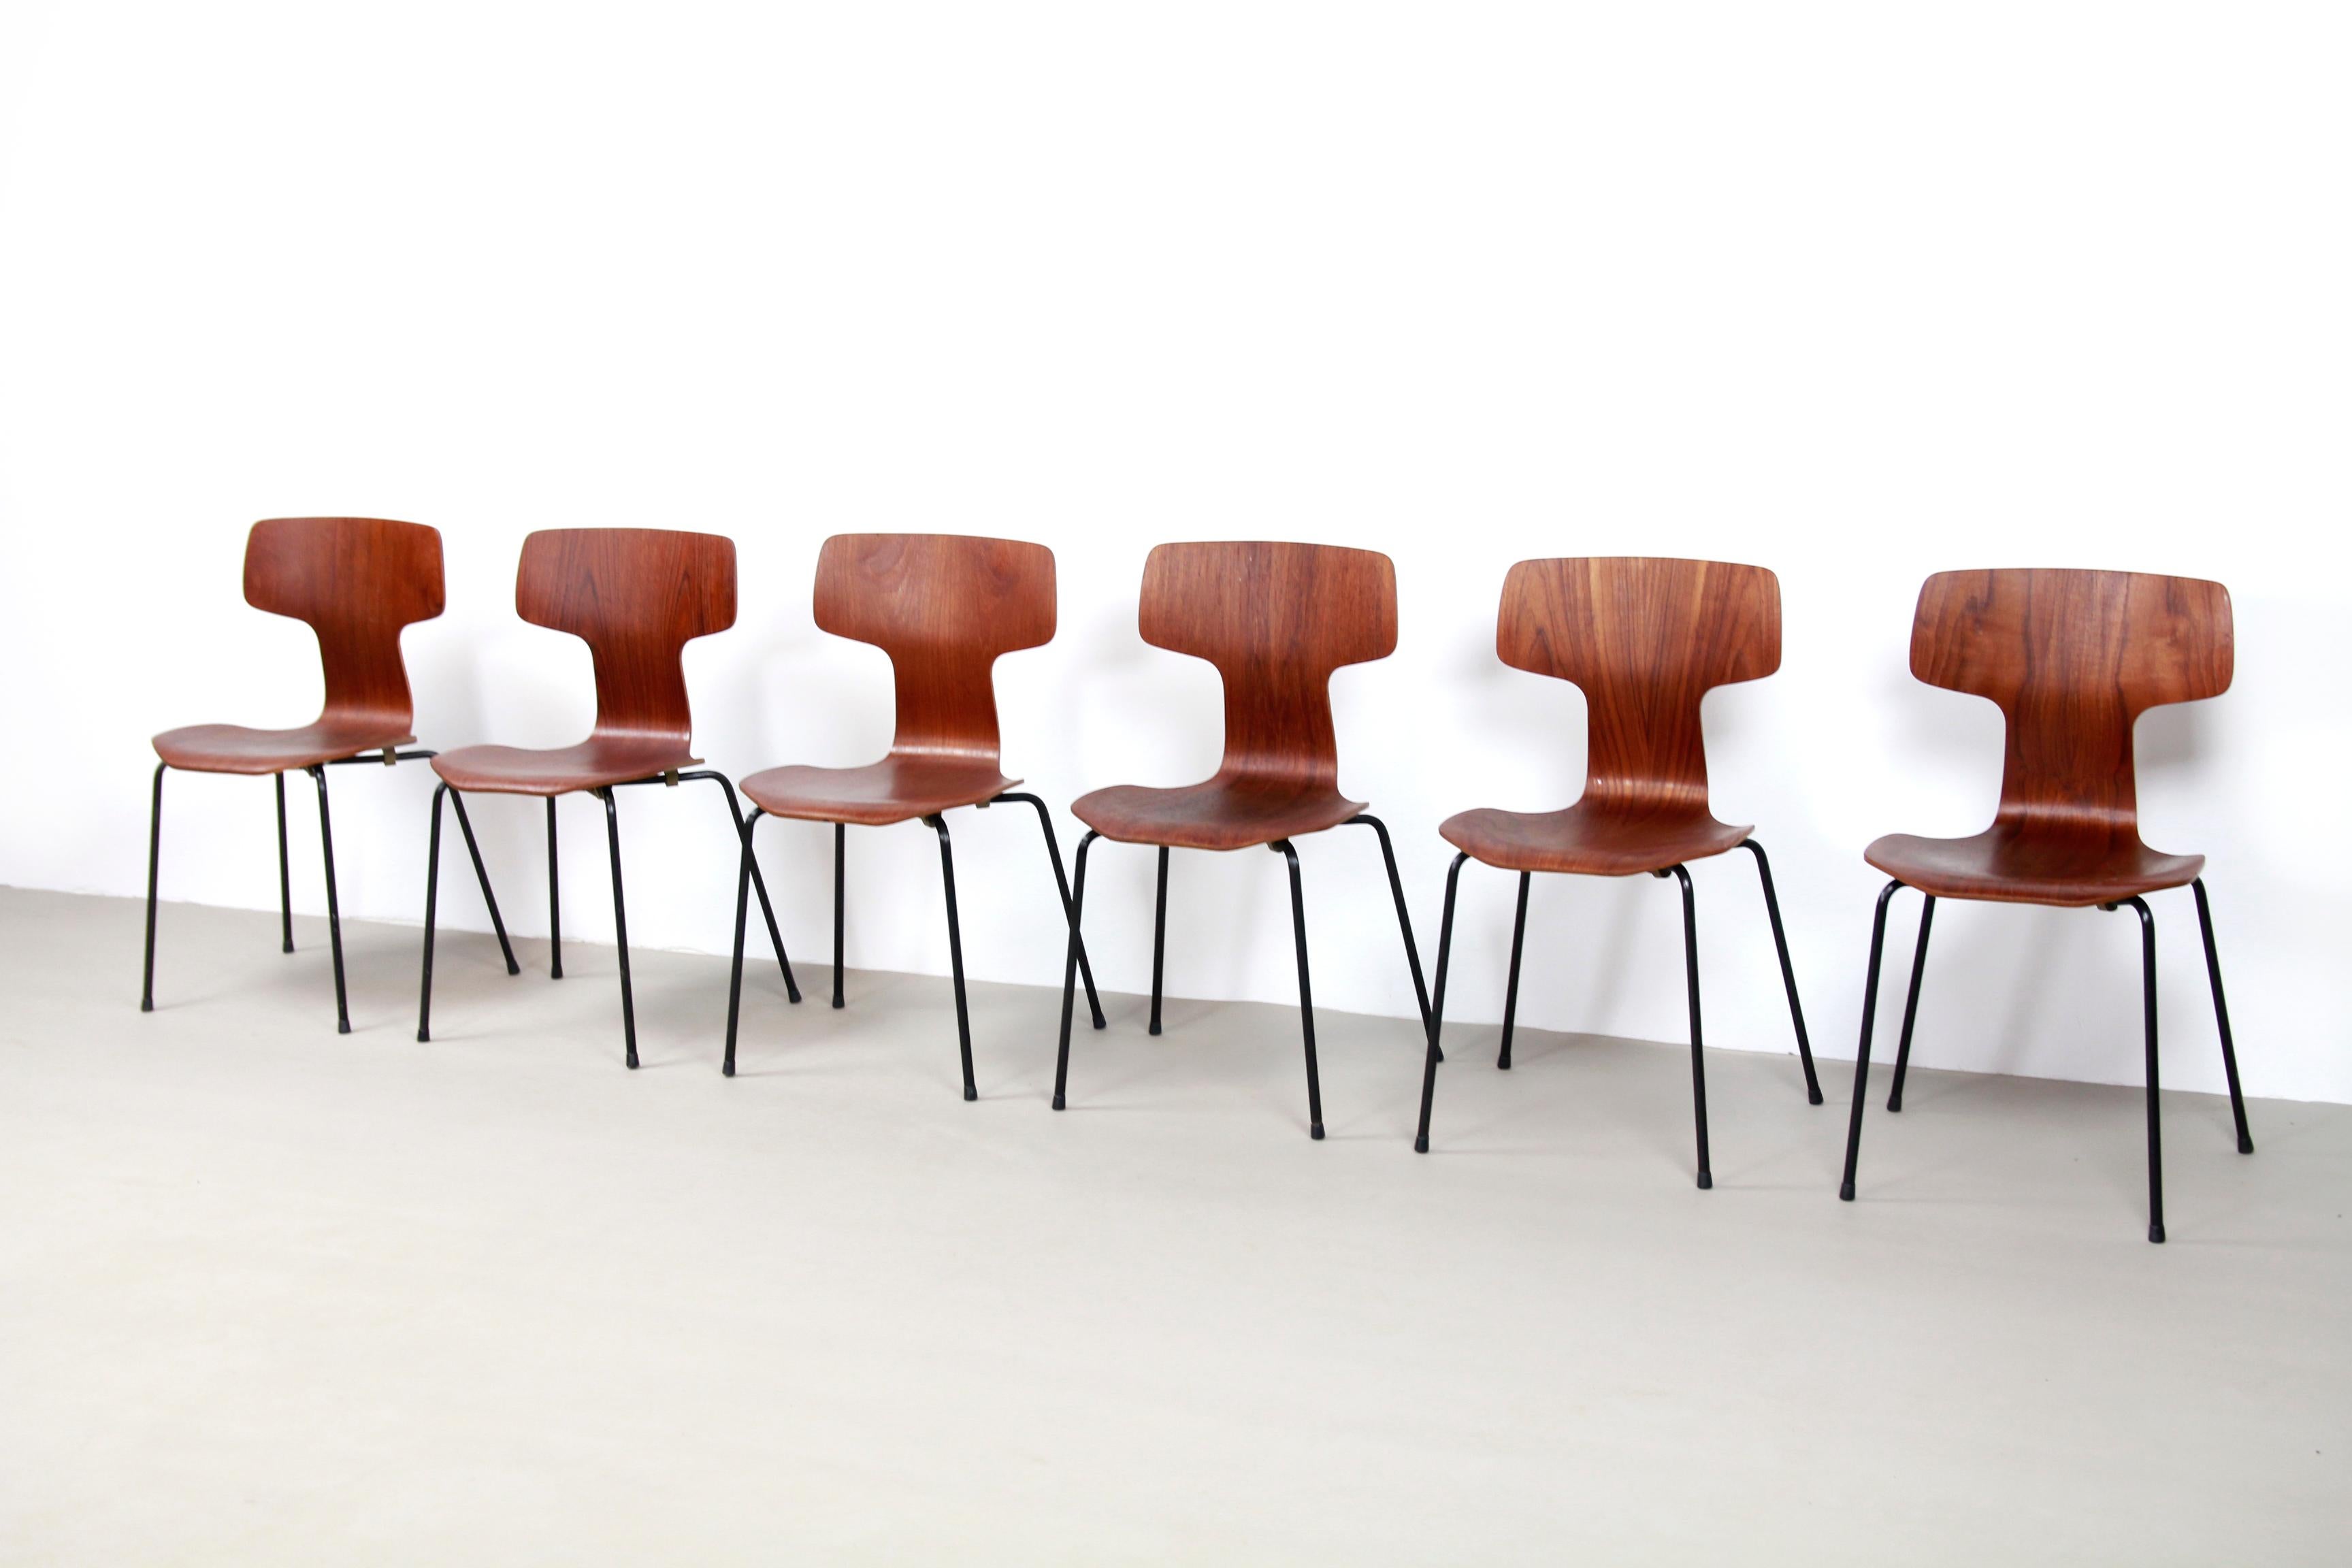 Set of six early Hammer chairs designed by Arne Jacobsen for Fritz Hansen. 
The official name of the chair is 